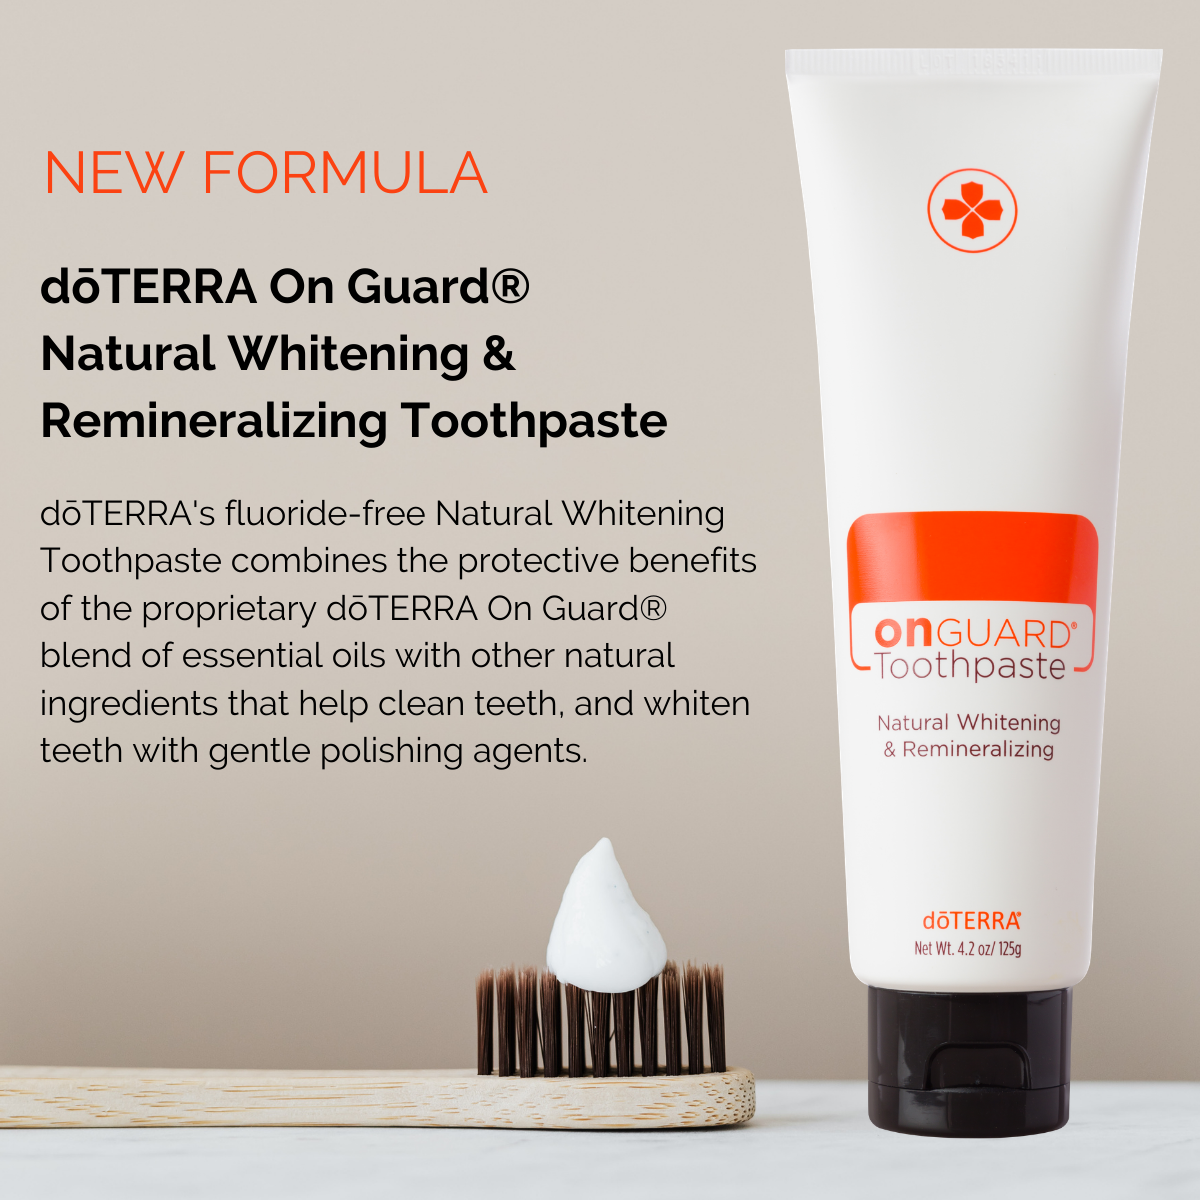 doTERRA On Guard NEW Natural Whitening and Remineralizing Toothpaste